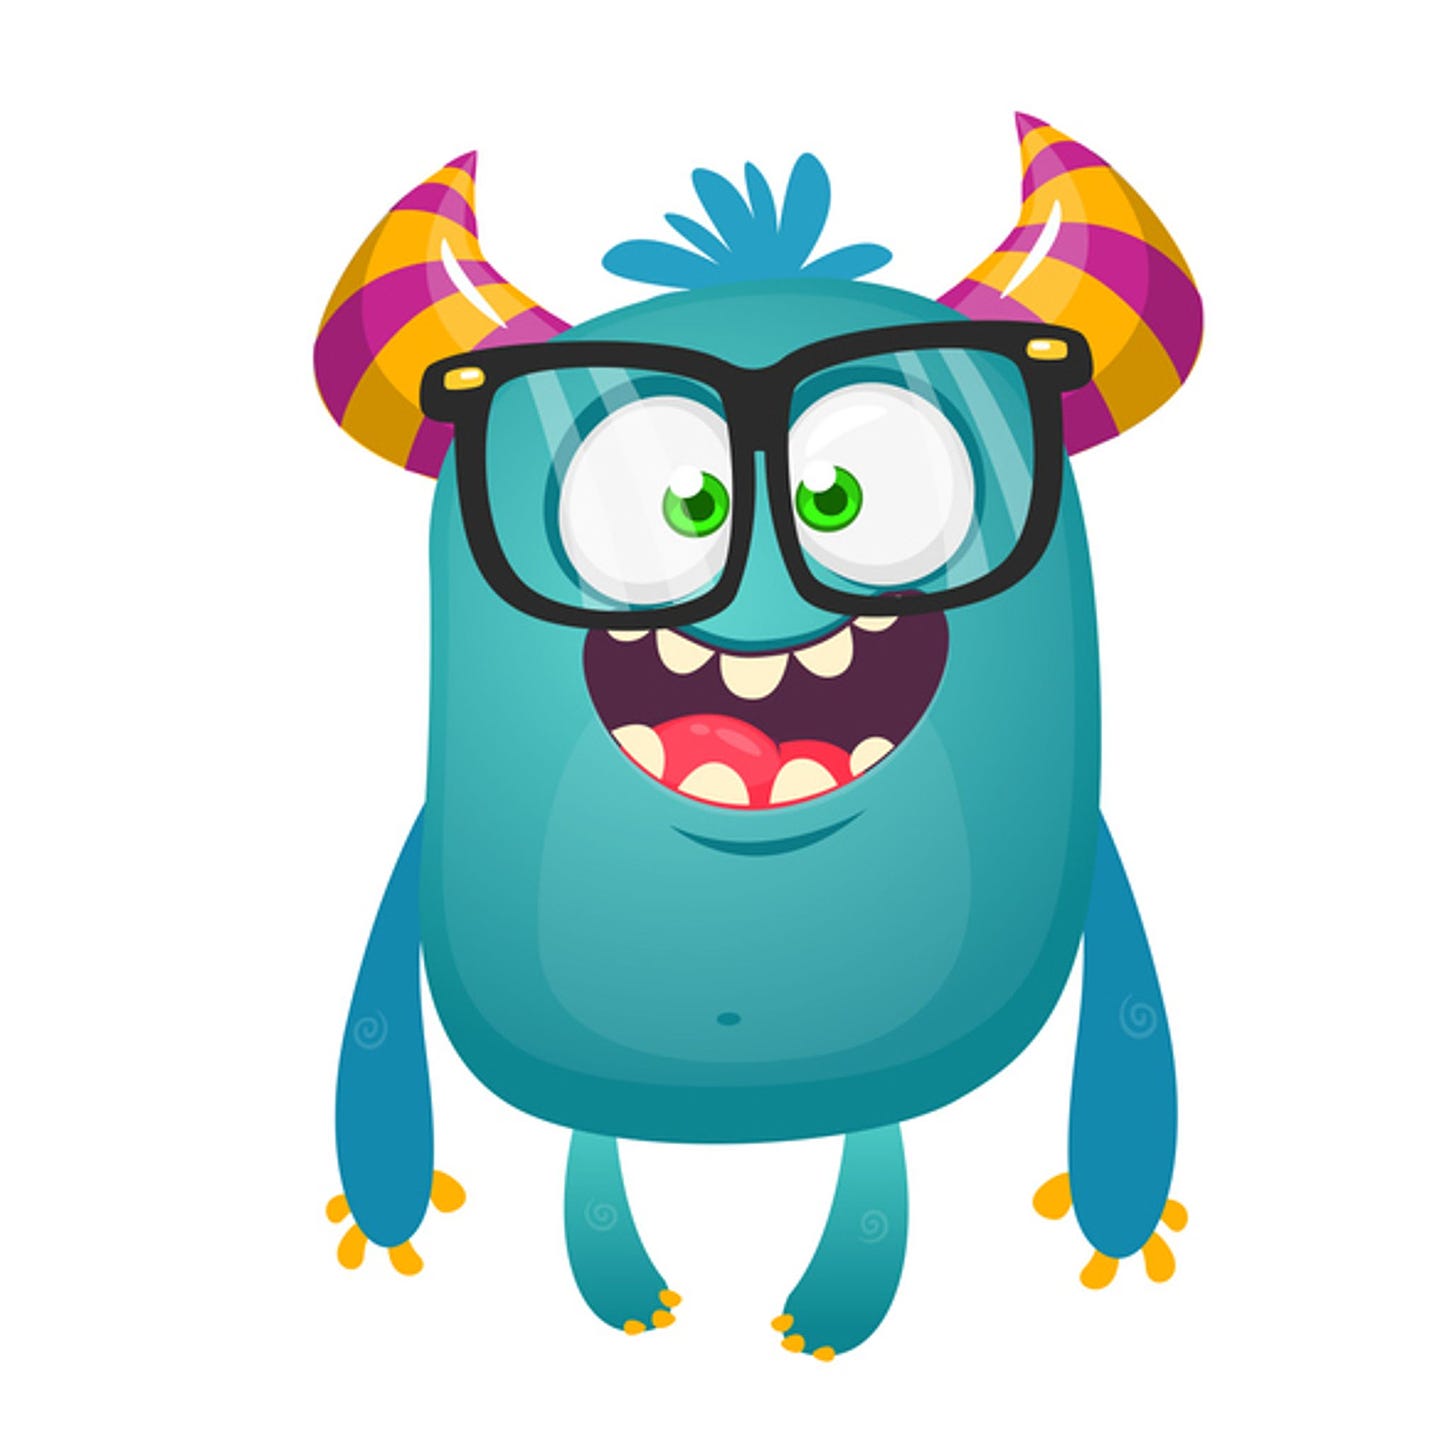 Friendly-looking blue monster with horns and big glasses